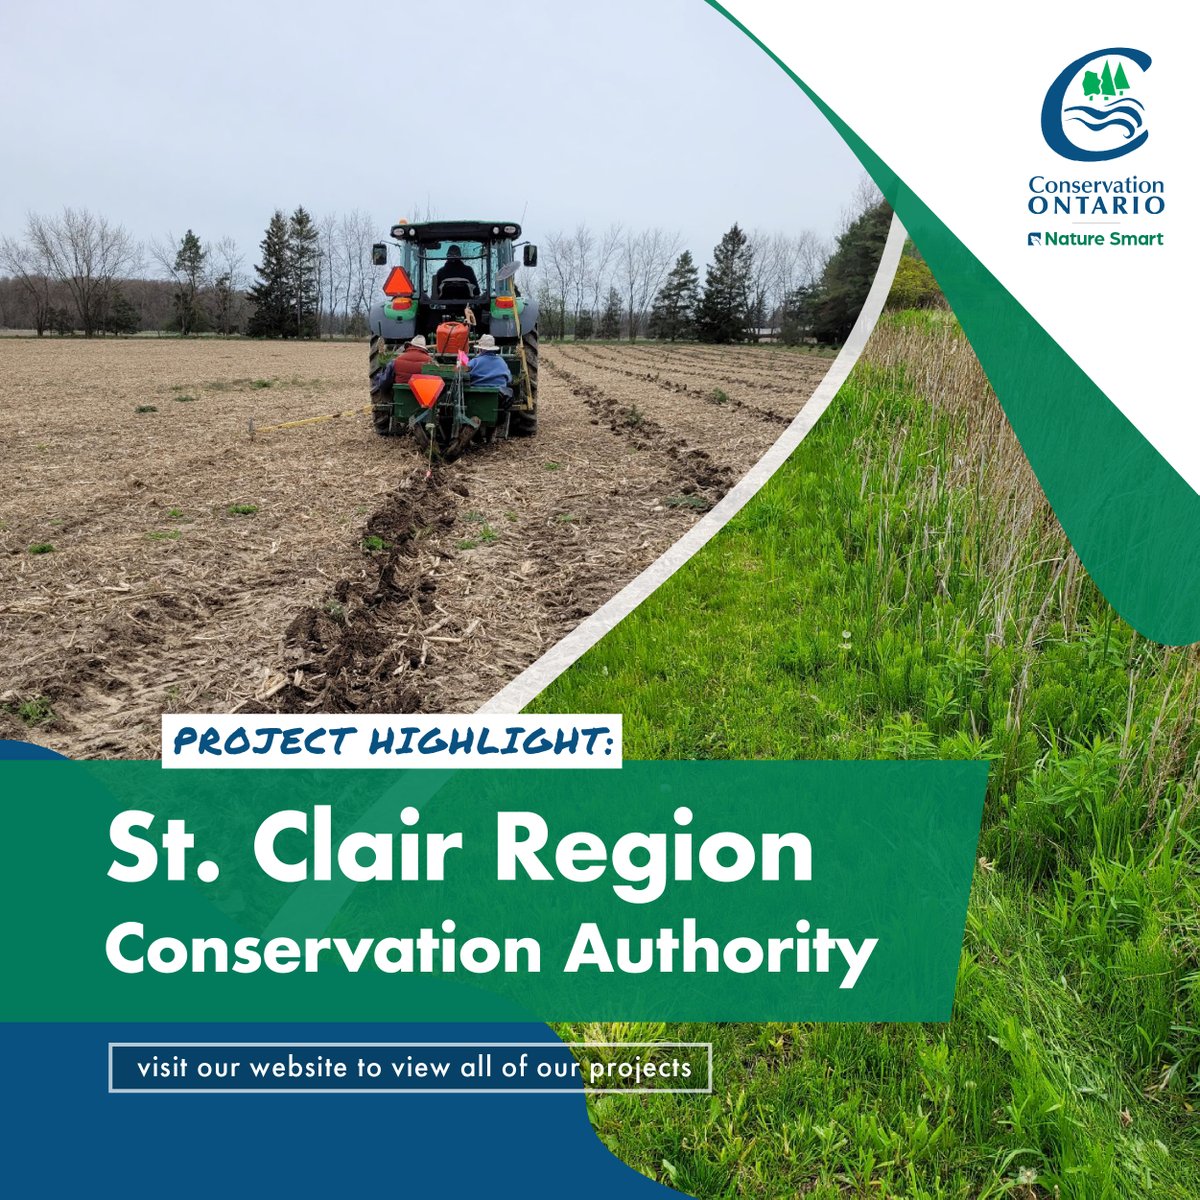 With funding from @environmentca Nature Smart Climate Solutions Fund, @SCRCA_water planted grass buffers in retired cropped riparian areas. Restored grass buffers lower erosion and boost carbon sequestration.

conservationontario.ca/policy-priorit…

#NatureRestores #NaturalChampions🌳